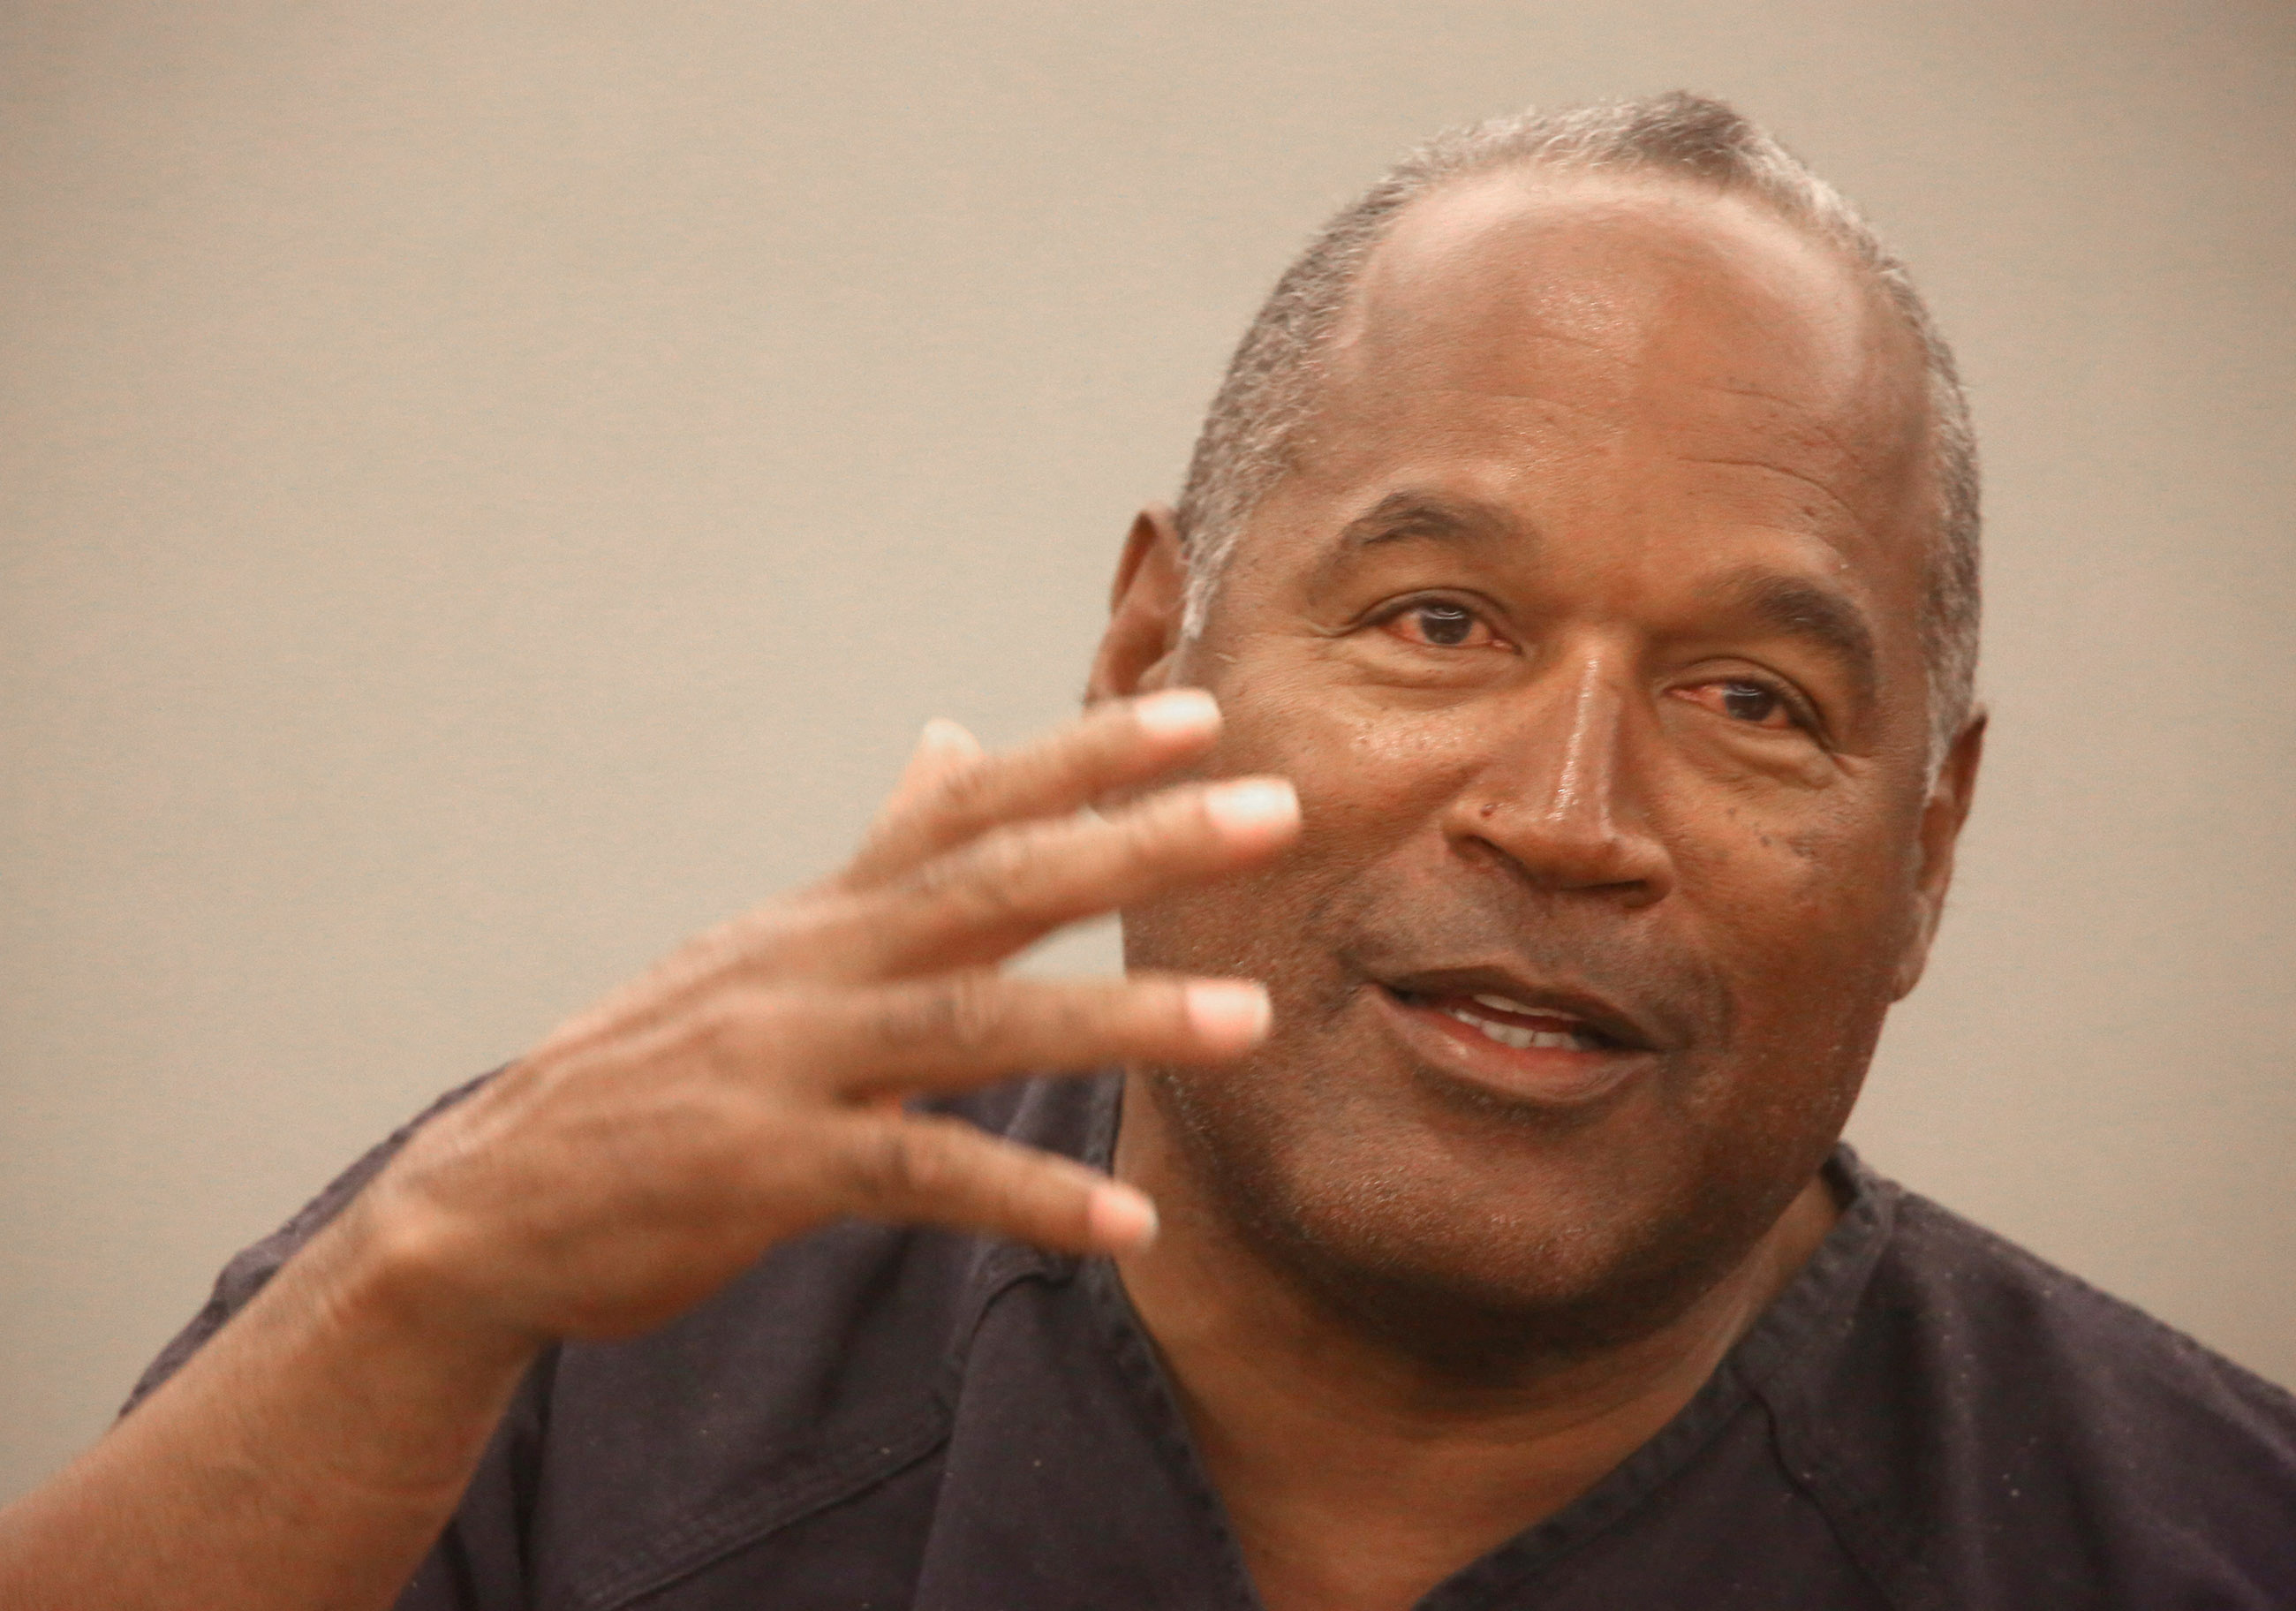 O.J. Simpson testifies during an evidentiary hearing in Clark County District Court in Las Vegas